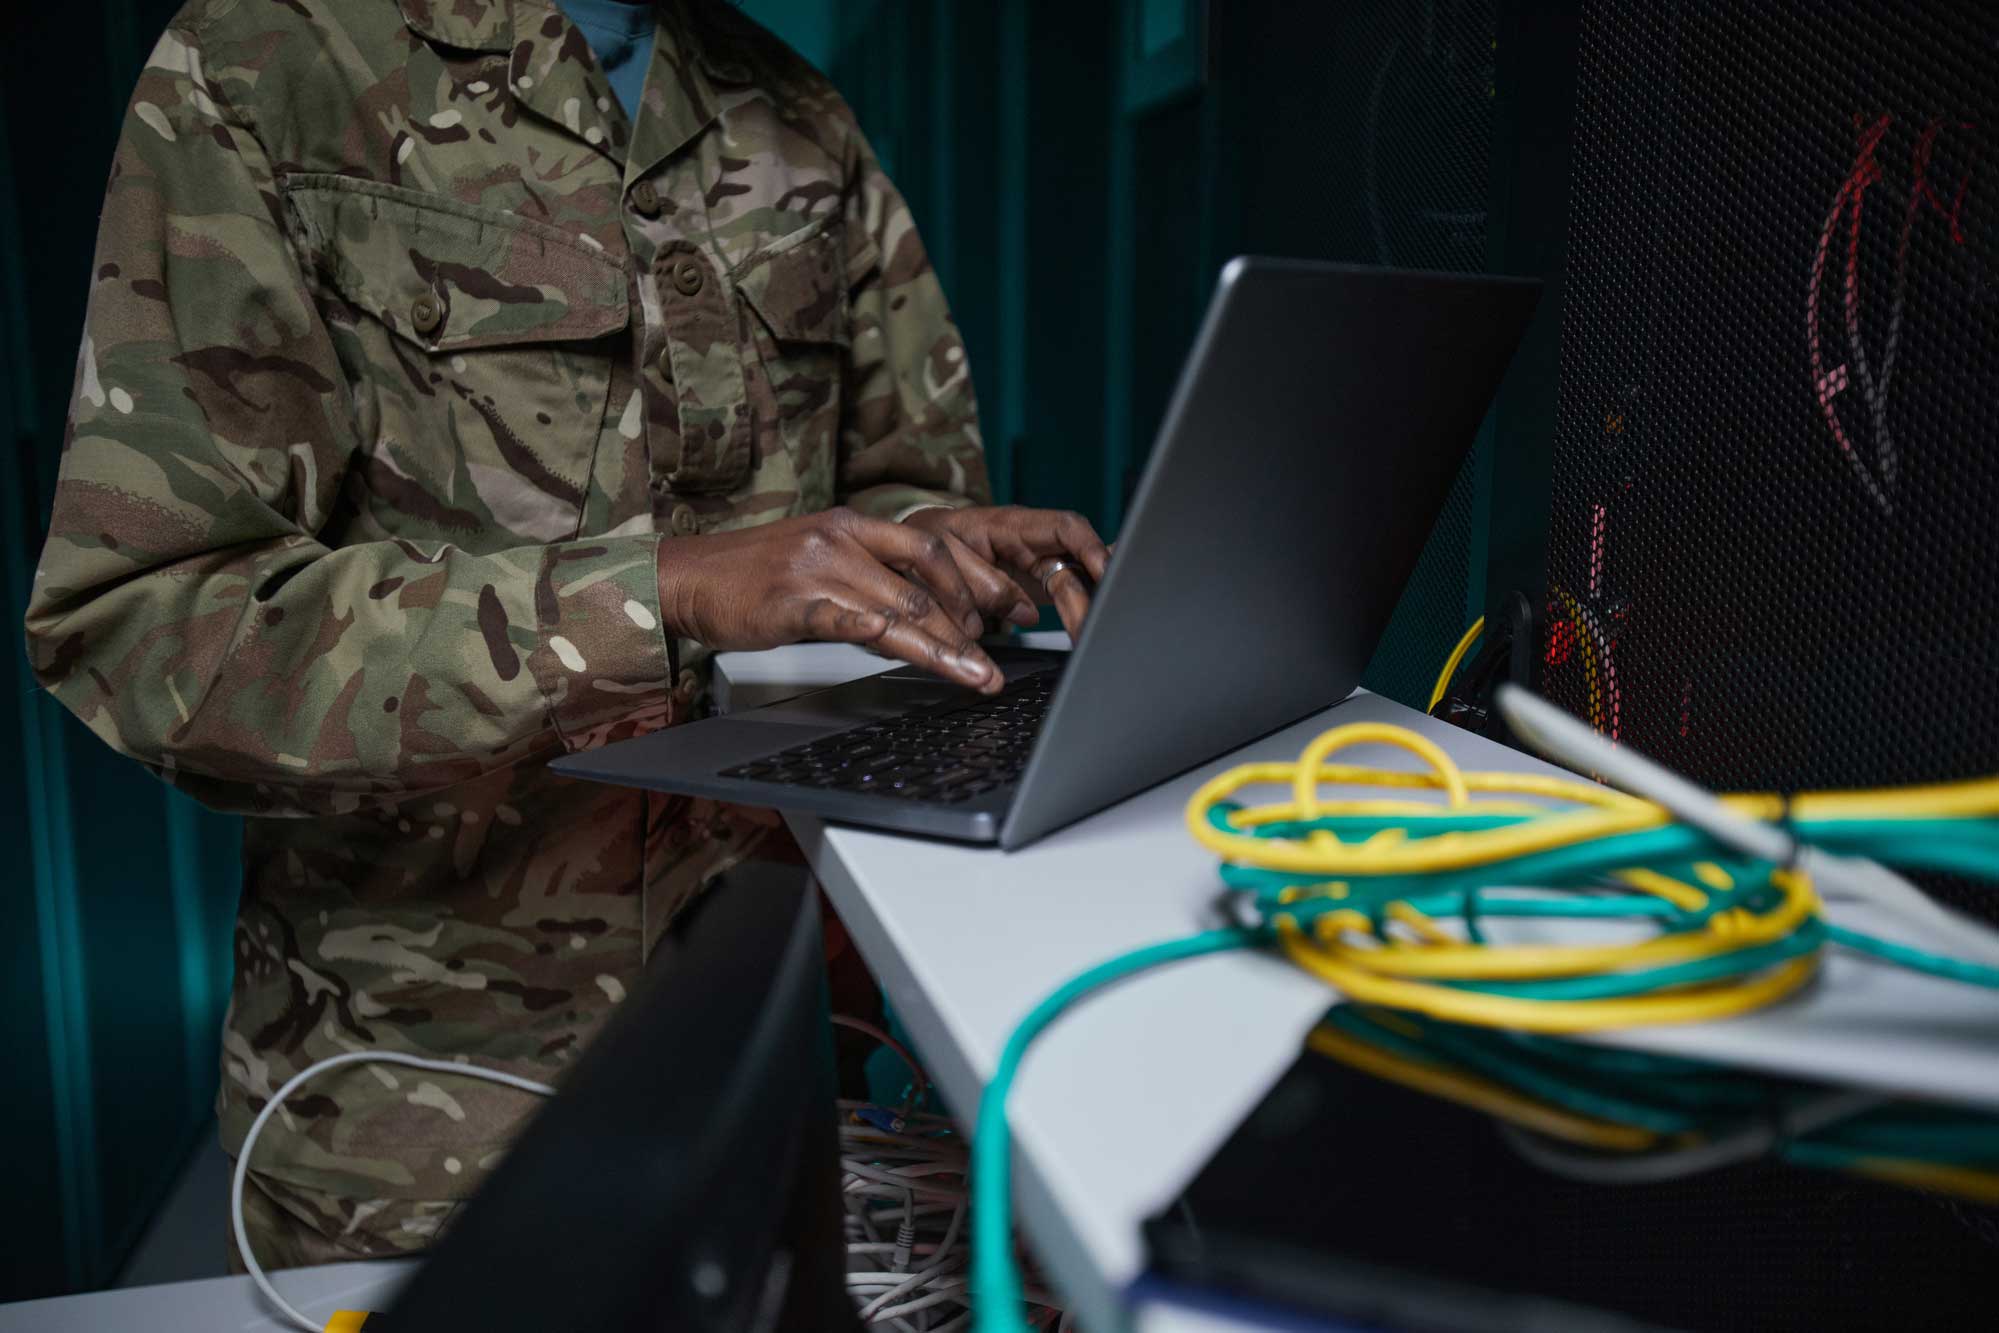 A person in a military uniform uses a laptop to set up a network in a server room.